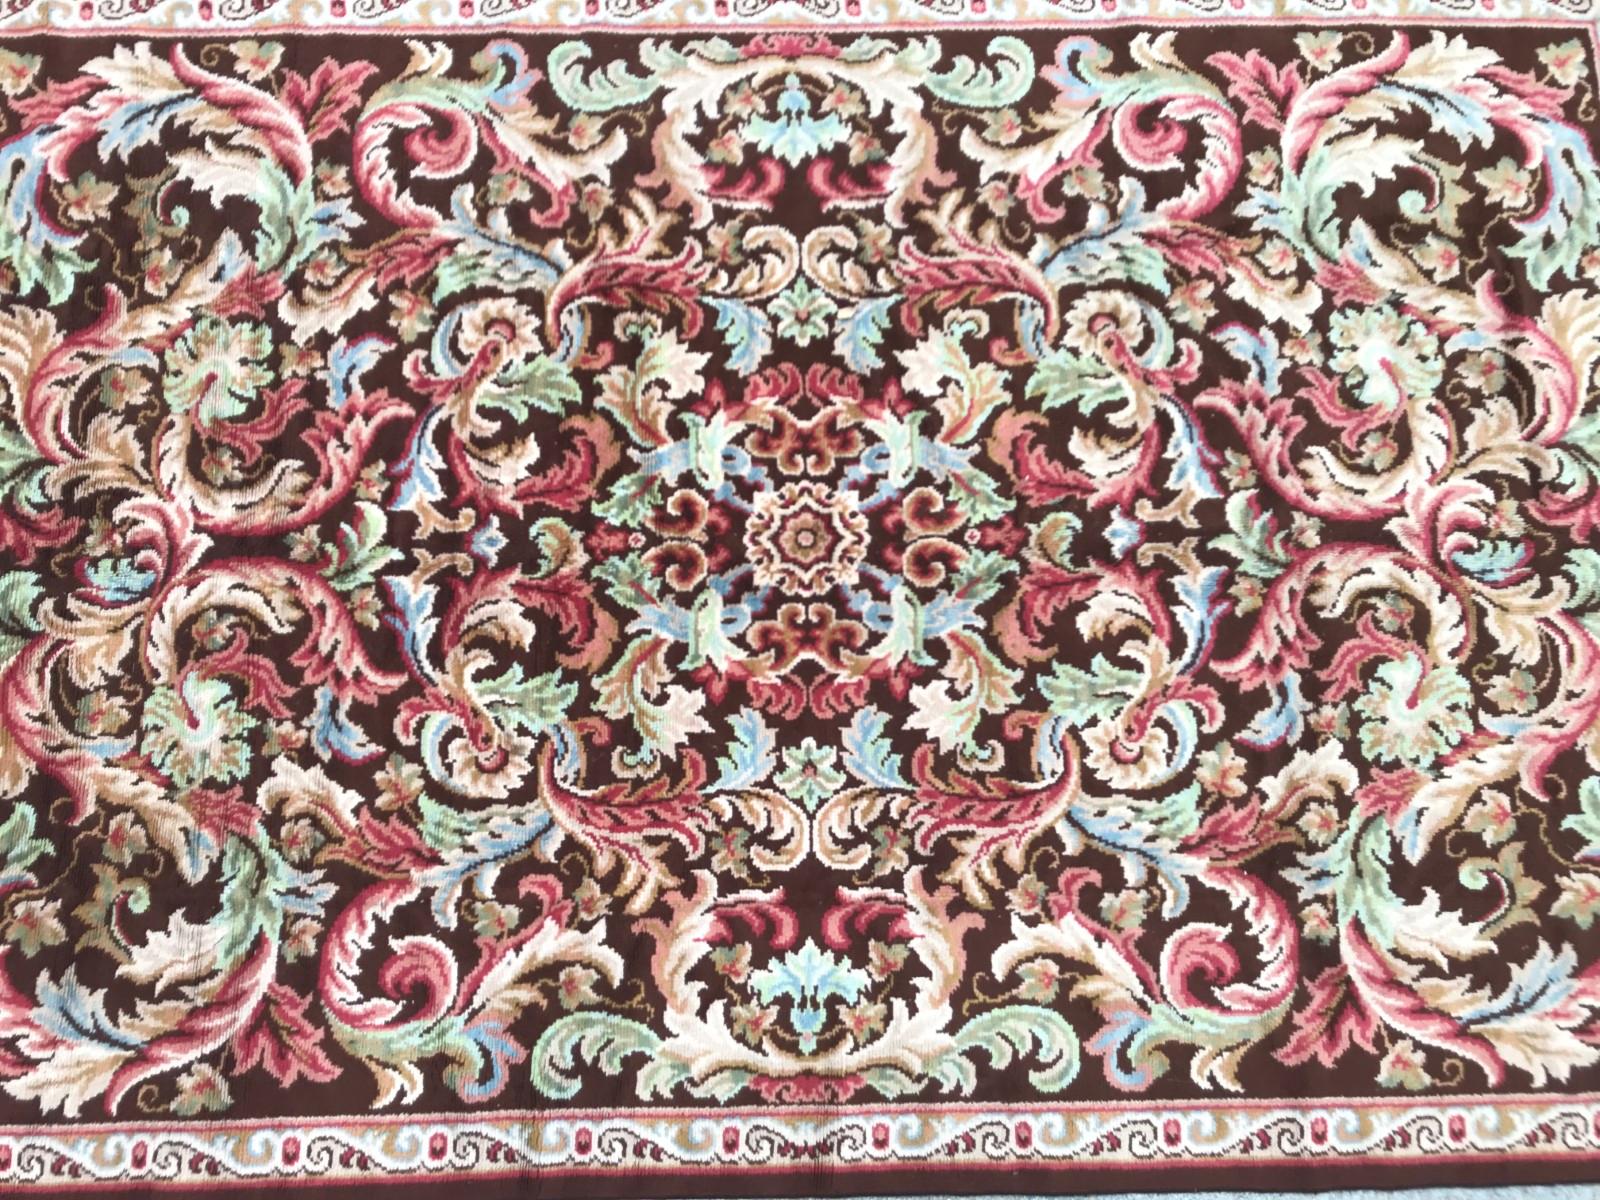 Beautiful French Aubusson rug with a Savonnerie floral design and nice colors with brown, pink, blue and green, entirely knotted with wool velvet on cotton foundations.

✨✨✨
